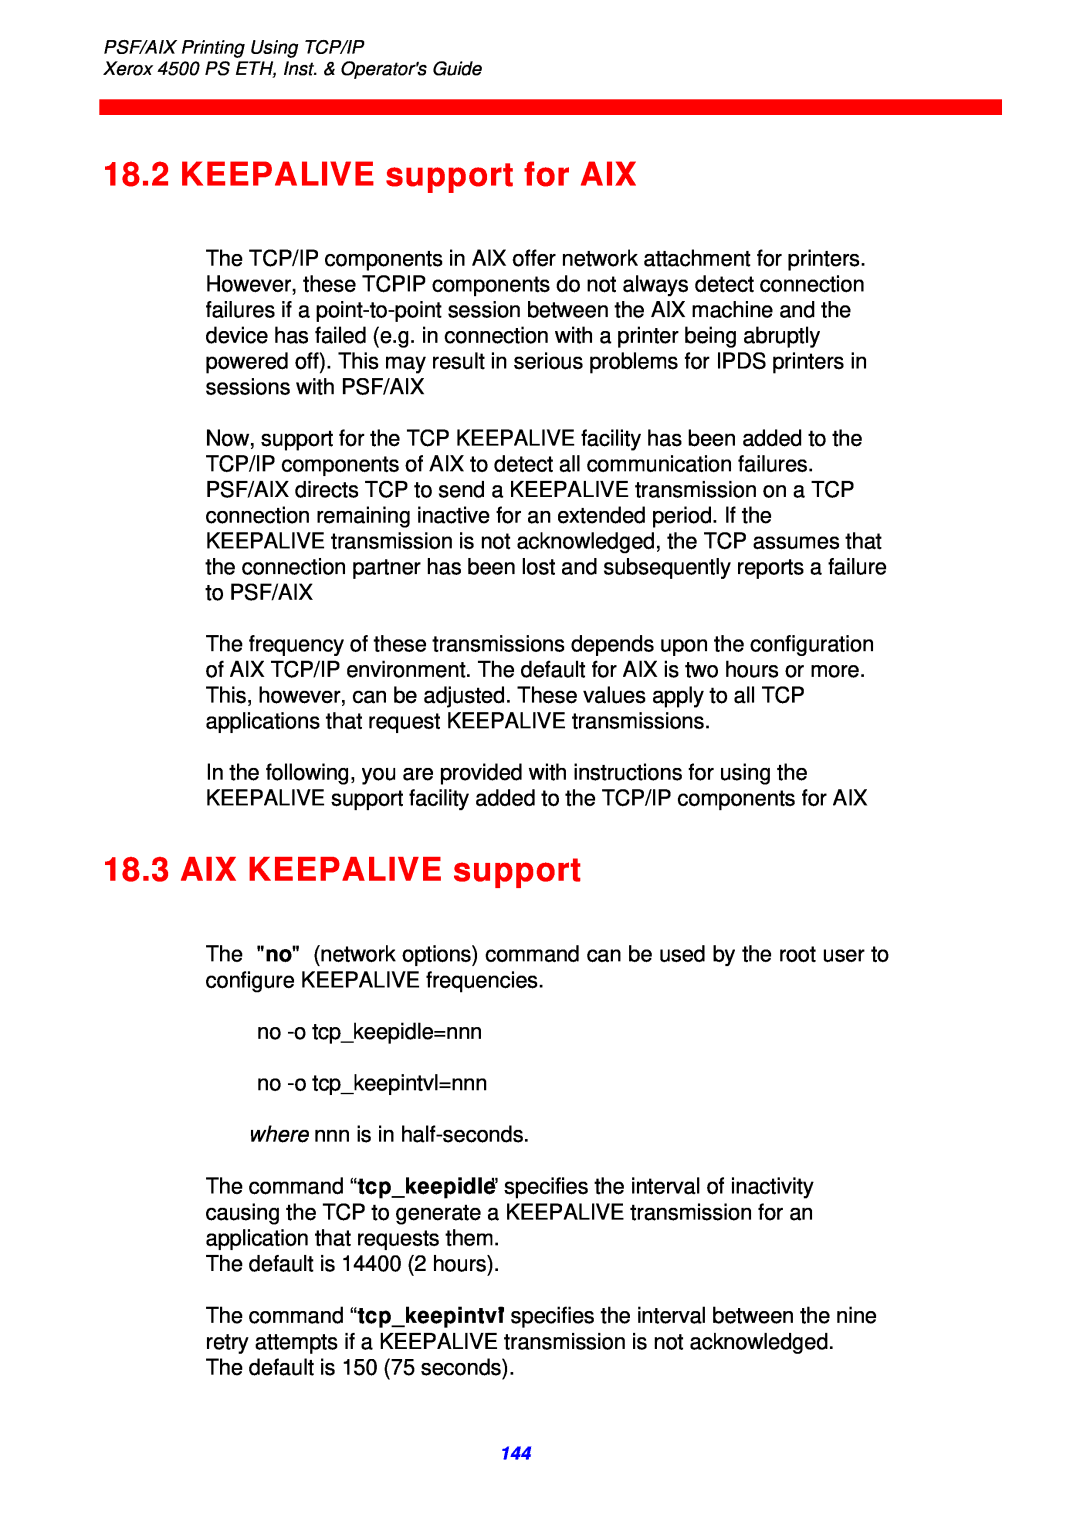 Xerox 4500 ps eth instruction manual KEEPALIVE support for AIX, AIX KEEPALIVE support 